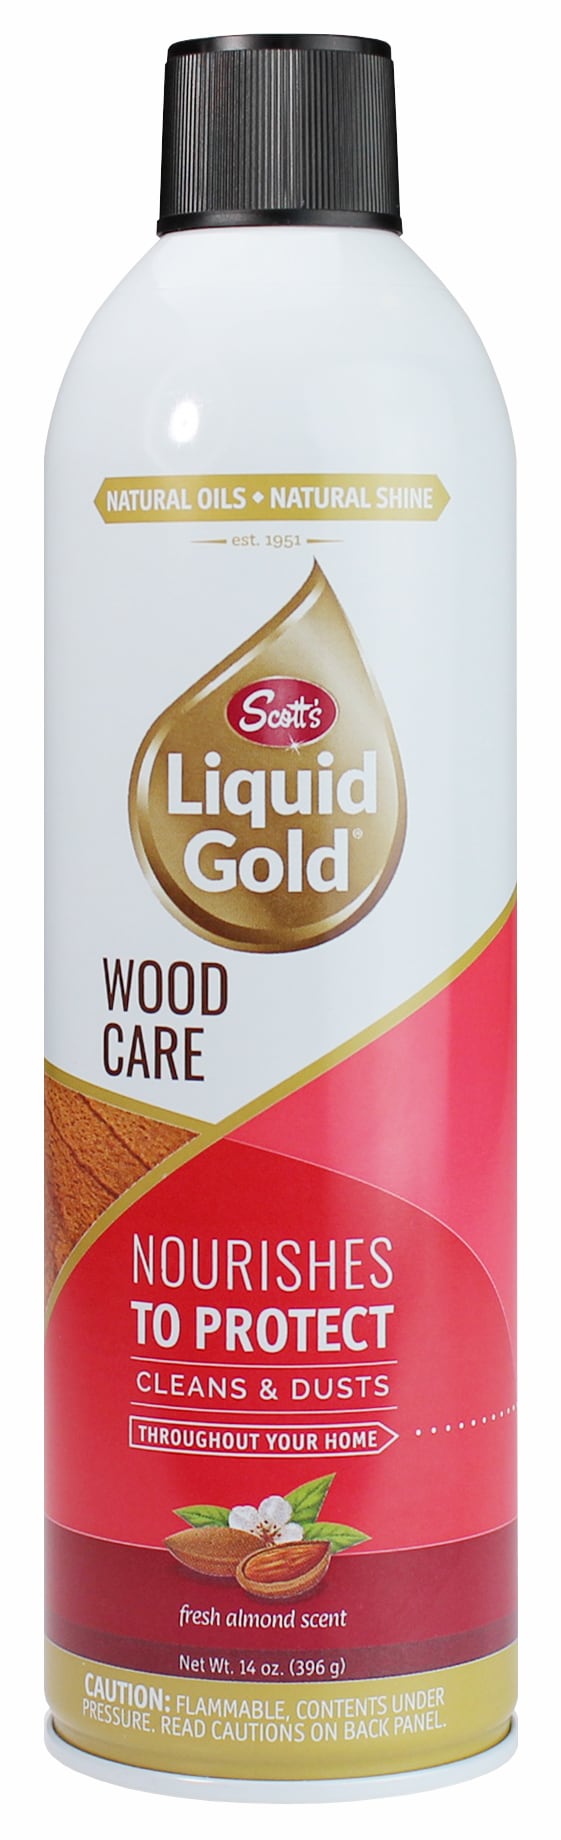 3 Pack Scott's Liquid Gold Pourable Wood Care Furniture Polish and Cleaner  14 oz